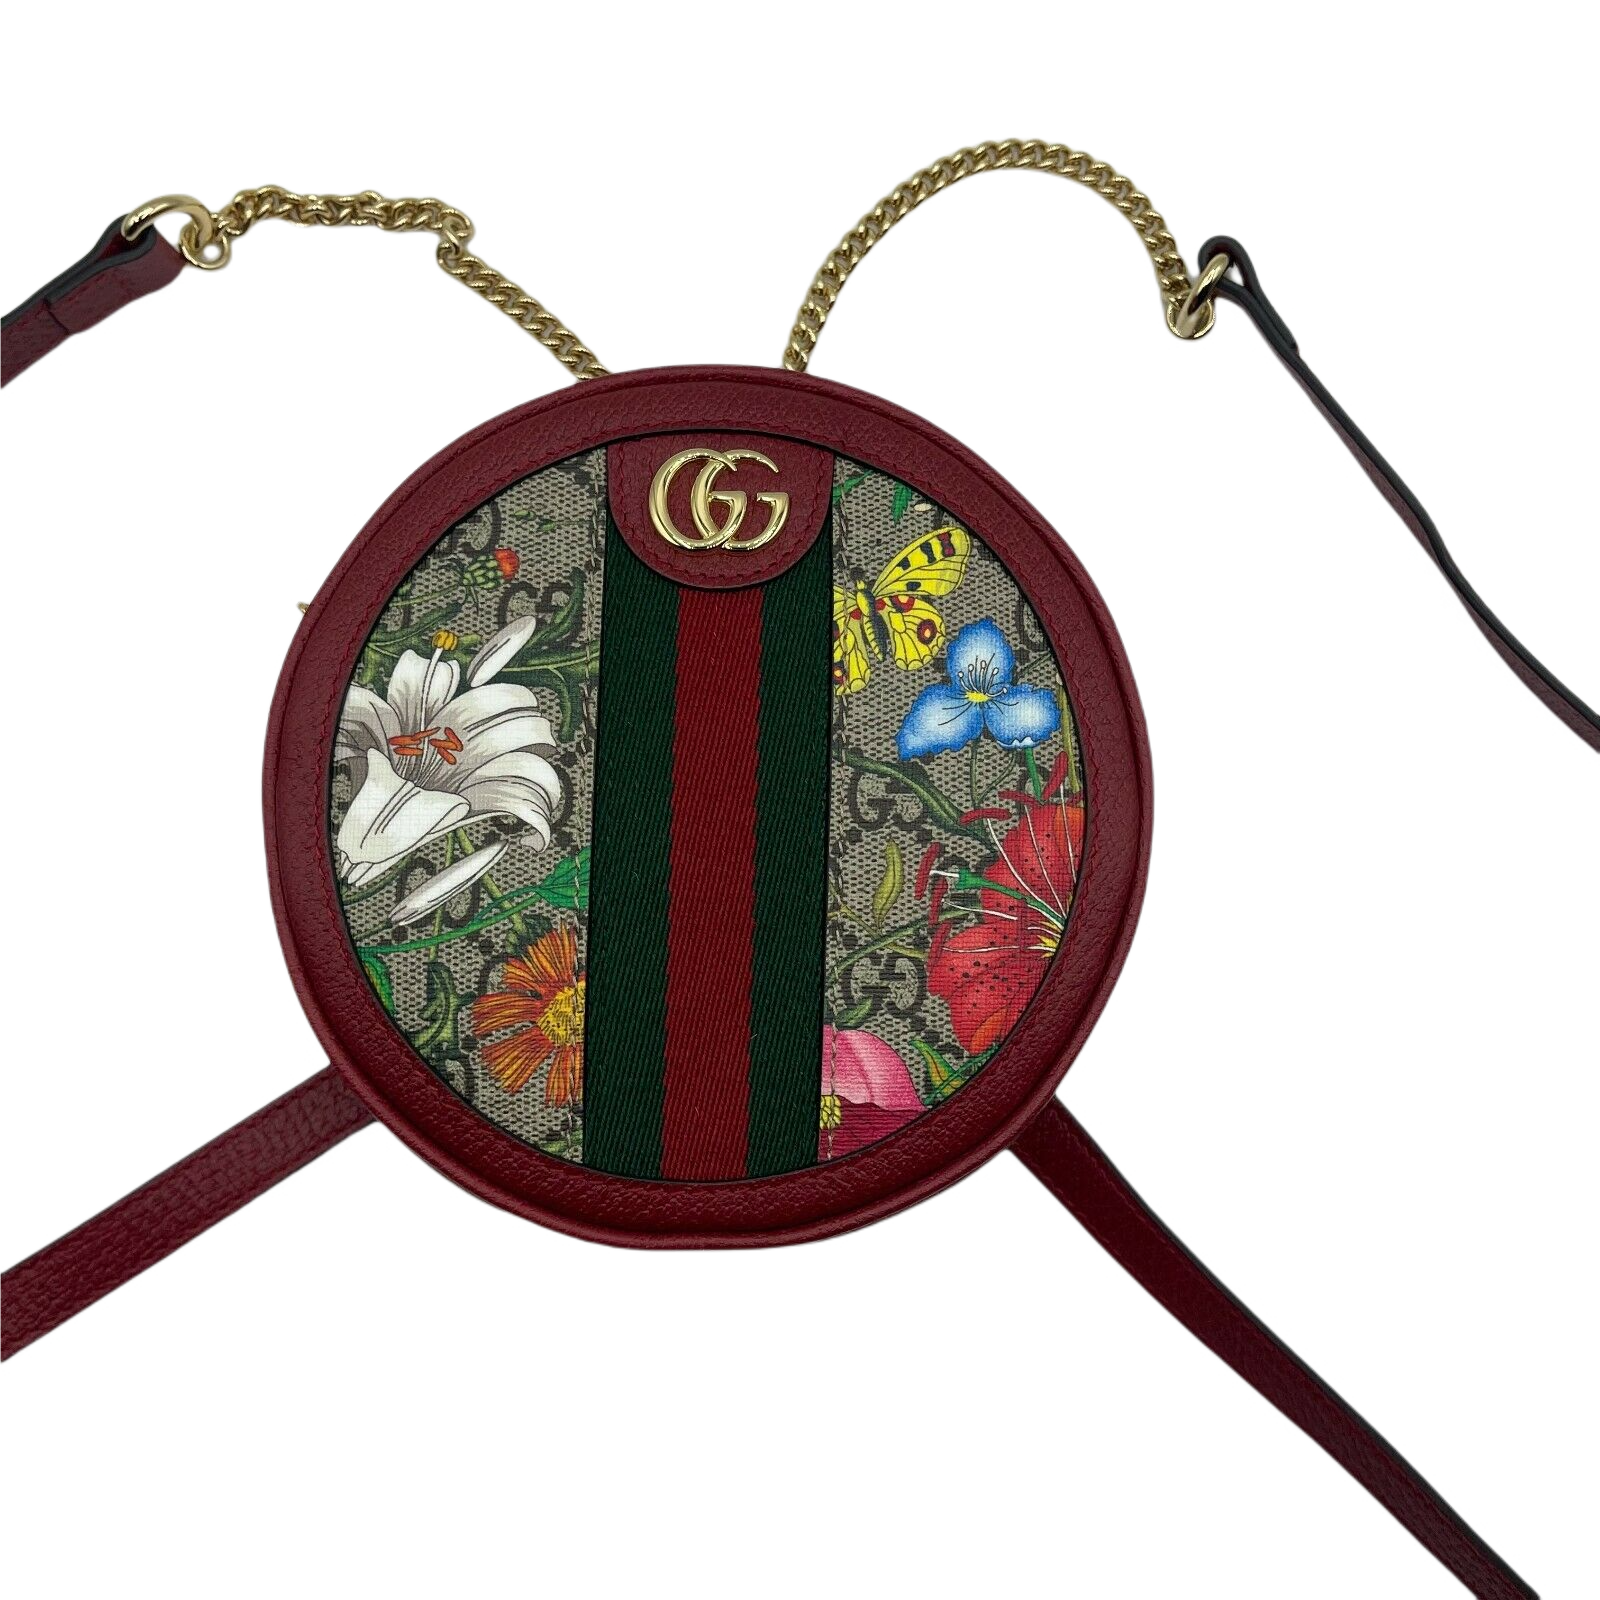 Gucci Ophidia GG Supreme Round Backpack on SALE